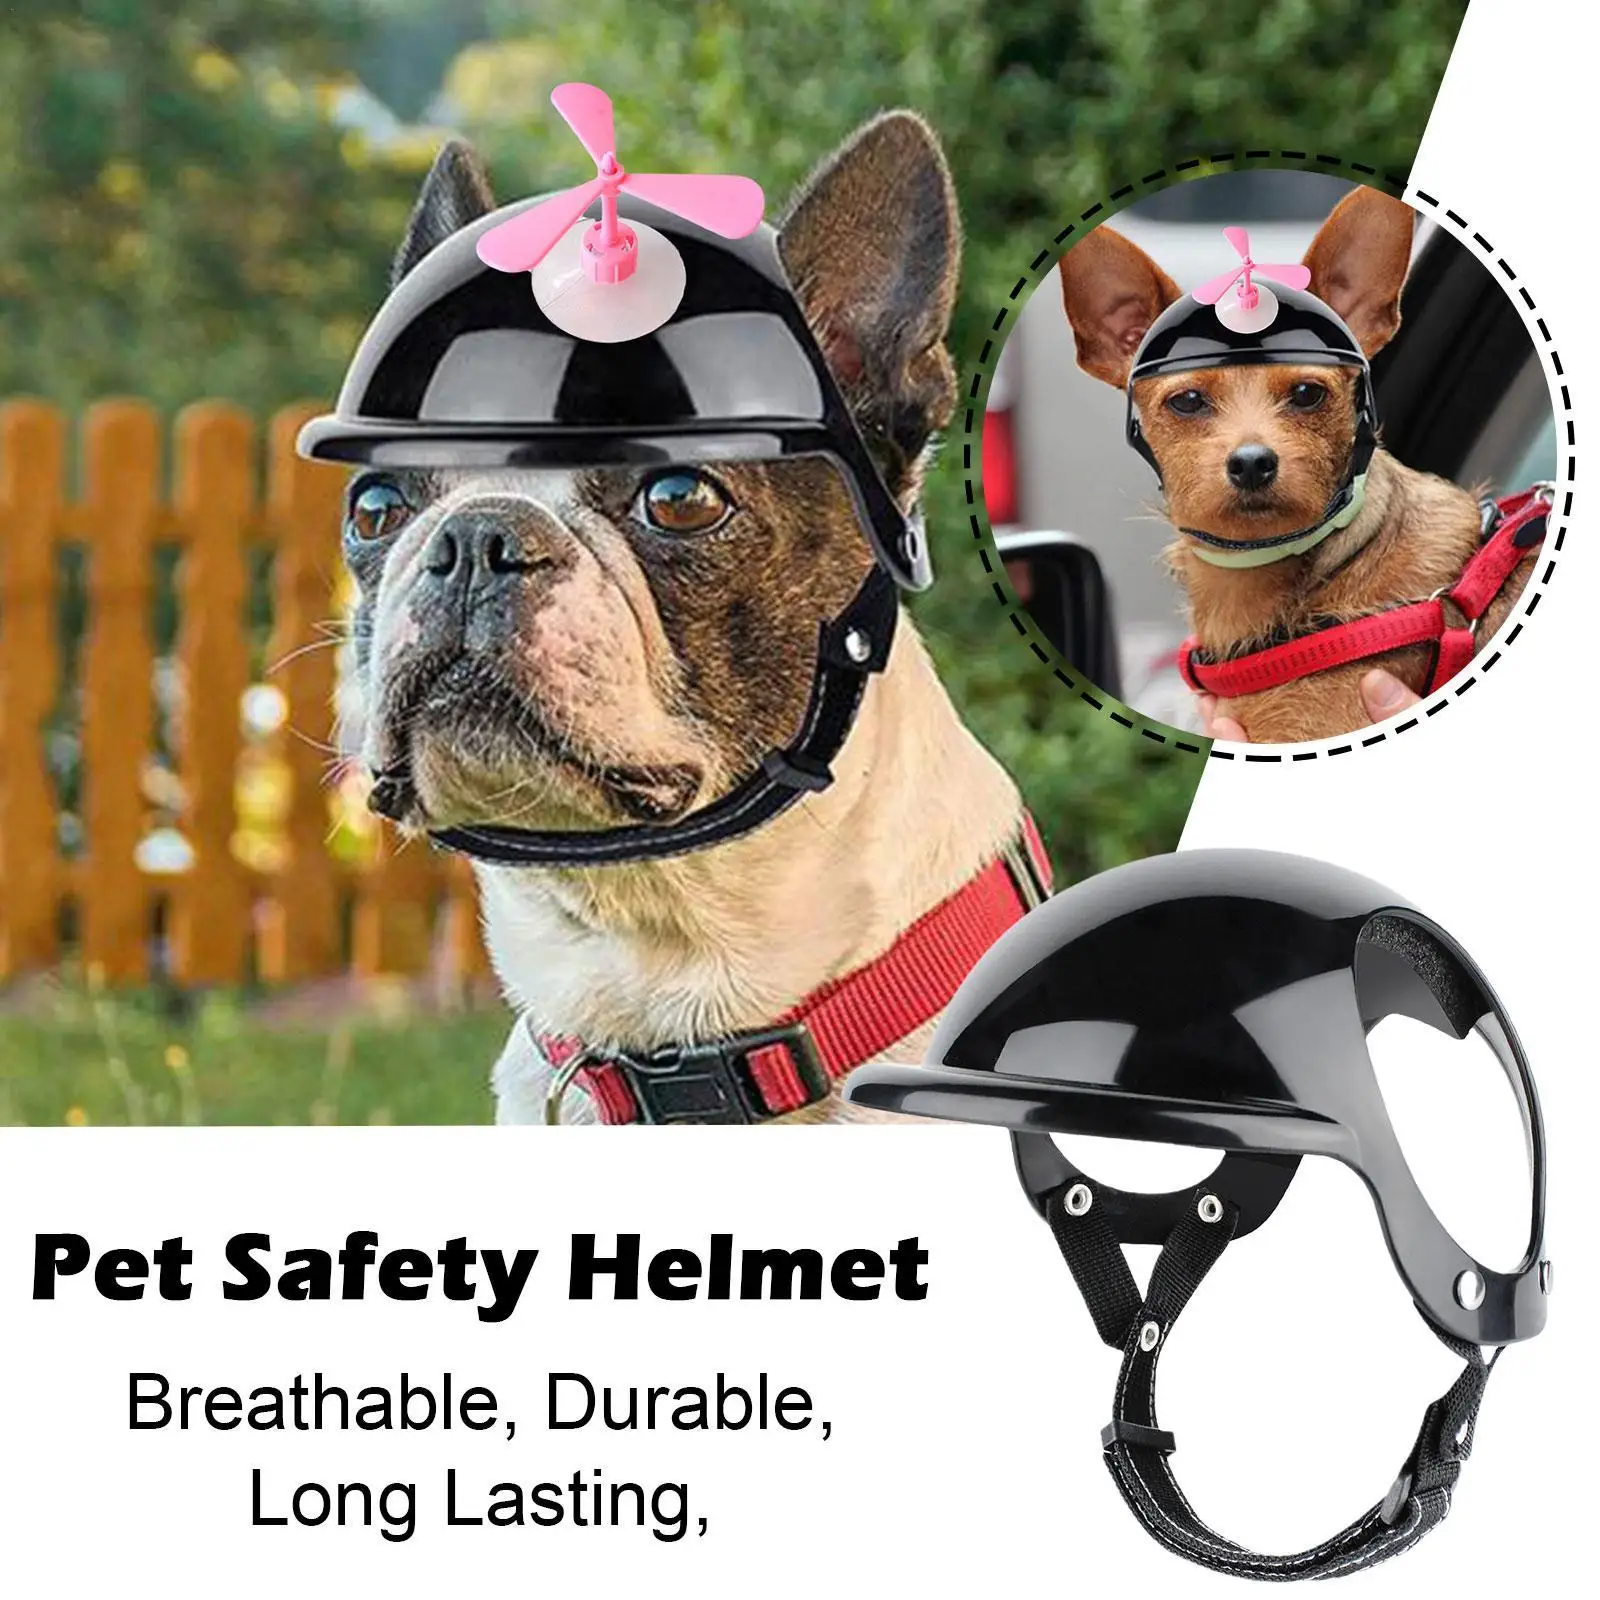 New Arrivals Pet Helmet Motorcycle Helmets Bike Hat Safety Riding Outfit With Ear Holes Helmets For Pet Dogs Cats Accessories